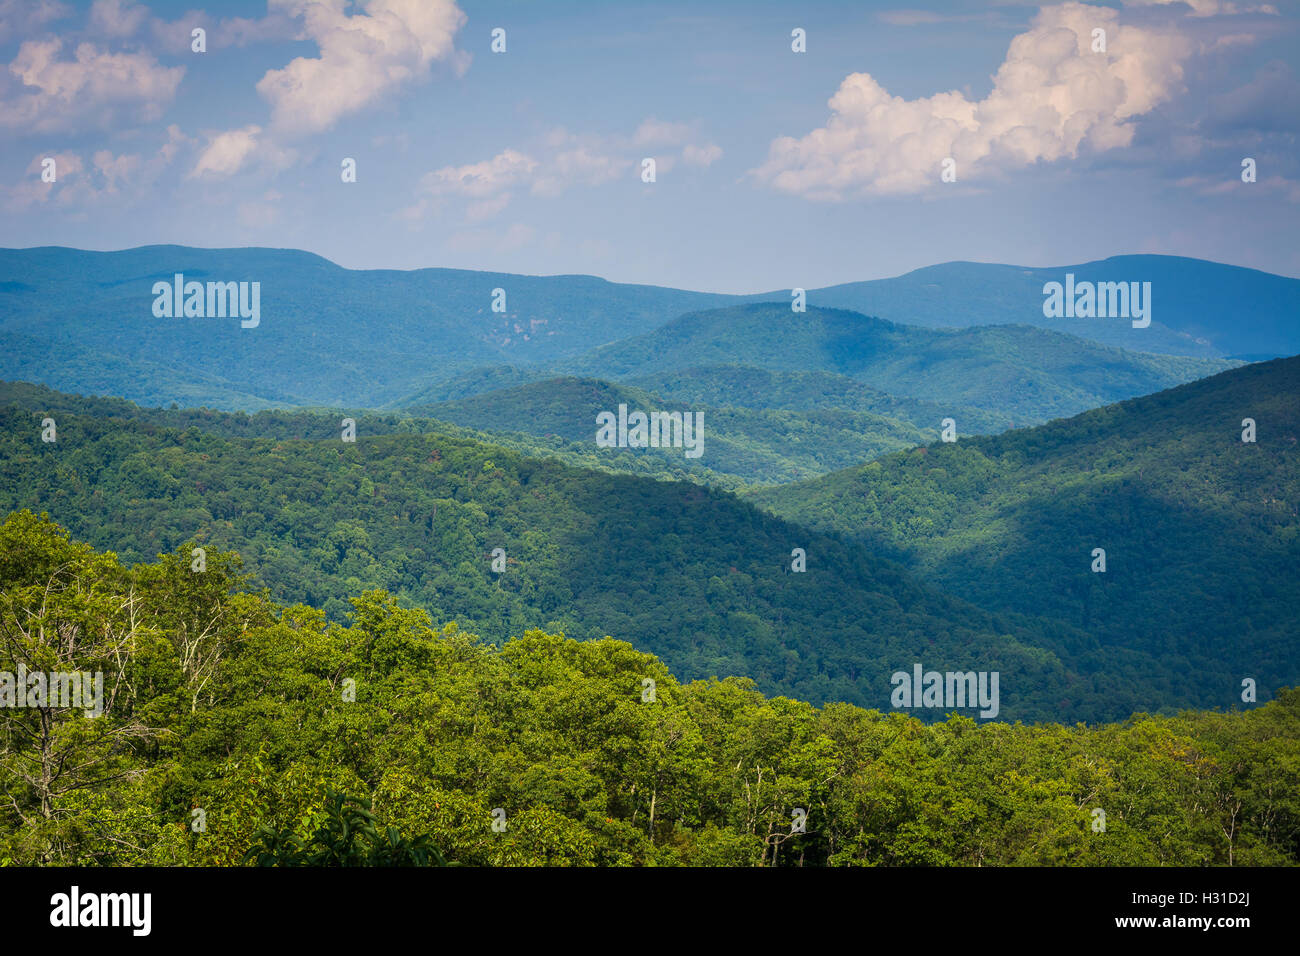 Layers of the Blue Ridge, seen from Skyline Drive, in Shenandoah National Park, Virginia. Stock Photo